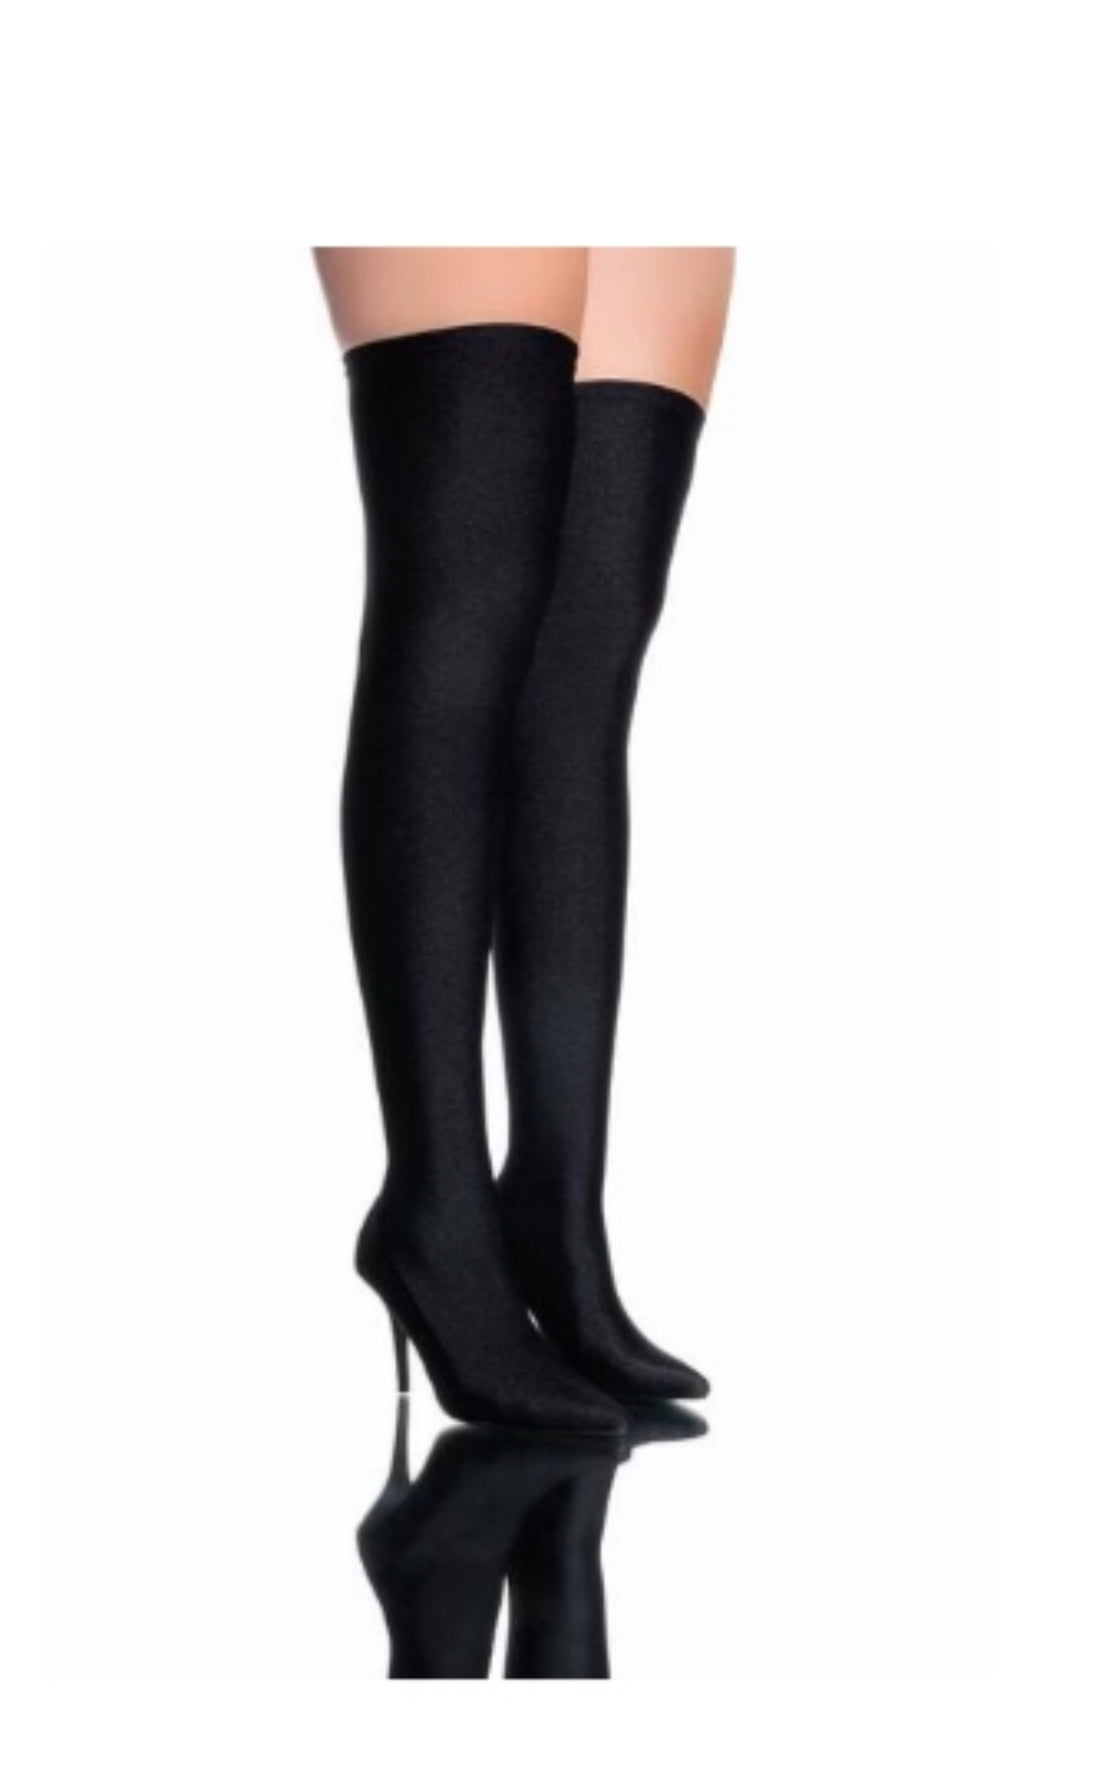 Share My World (Mary J Inspired Thigh High Boot)